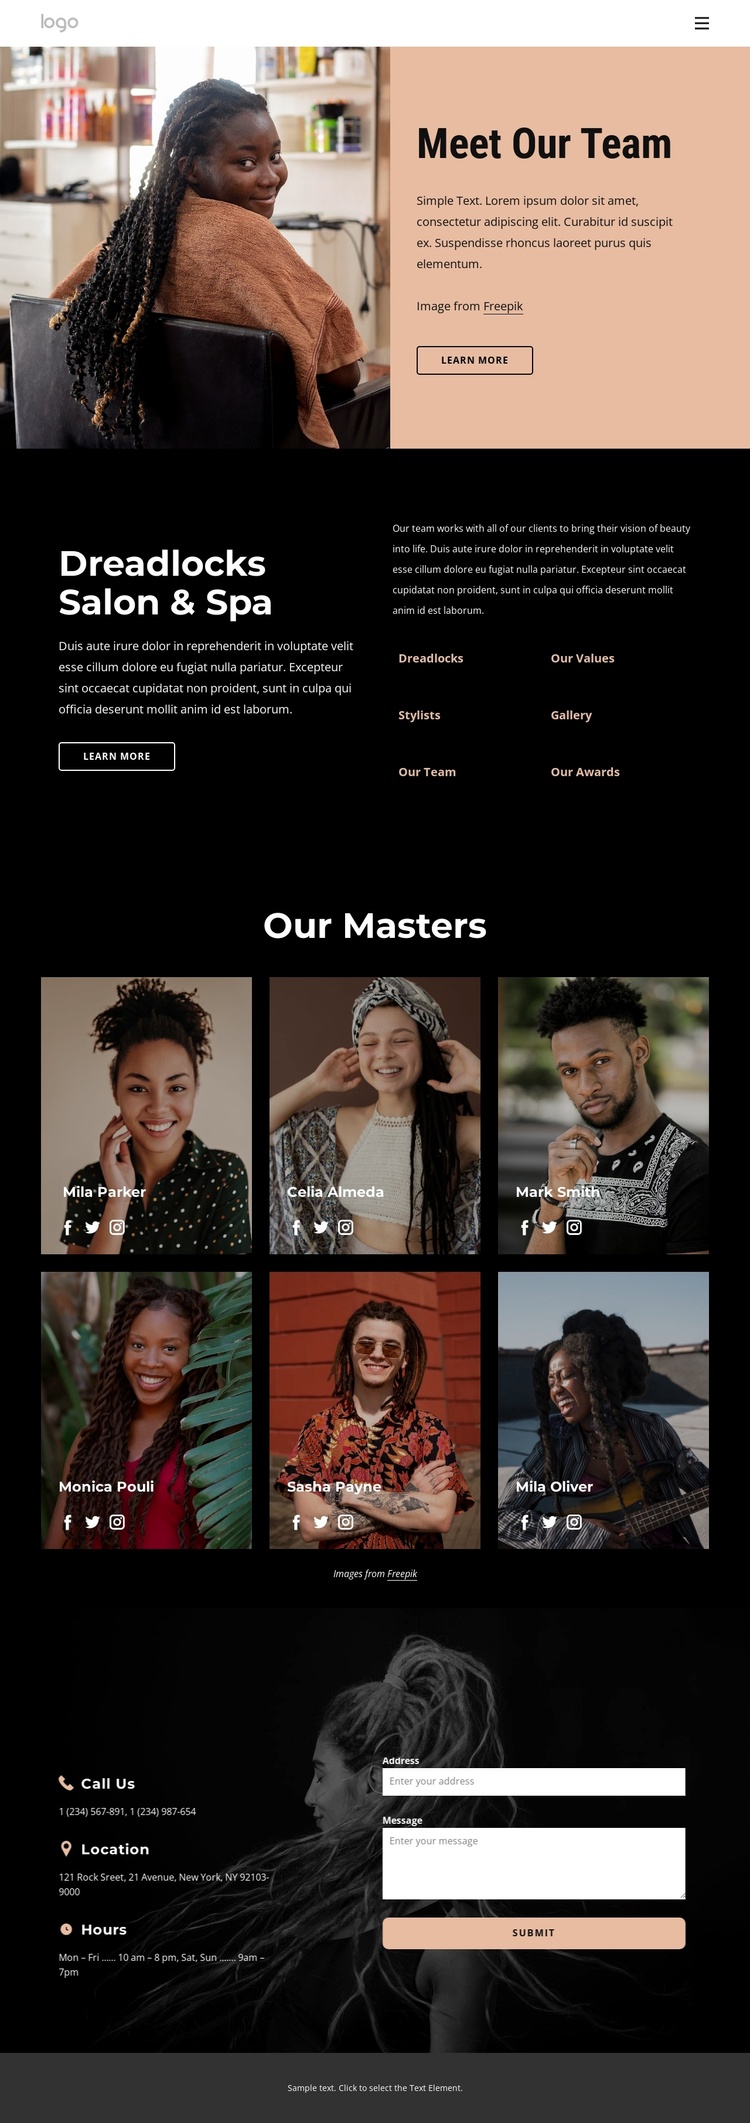 Meet our masters Joomla Template